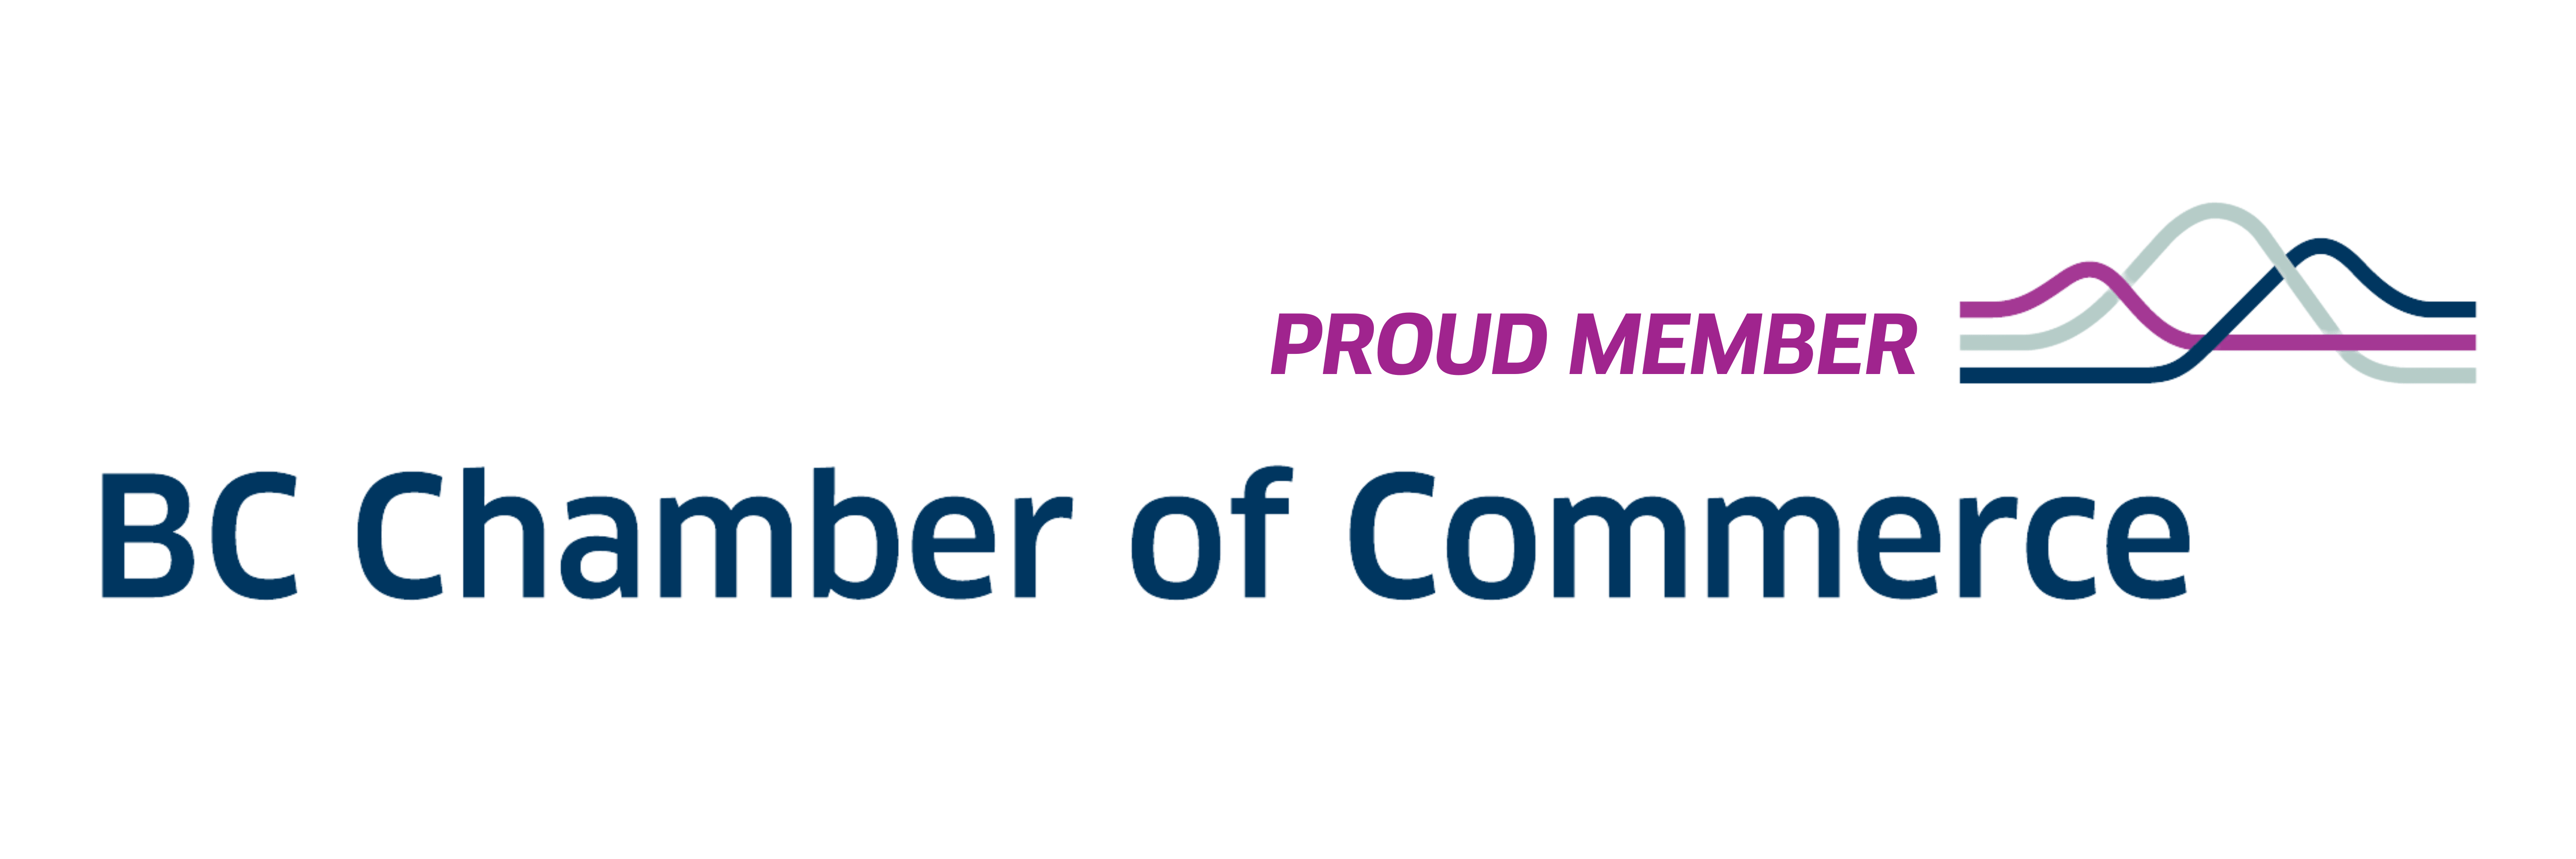 Logo which says "Proud Member" and "BC Chamber of Commerce"